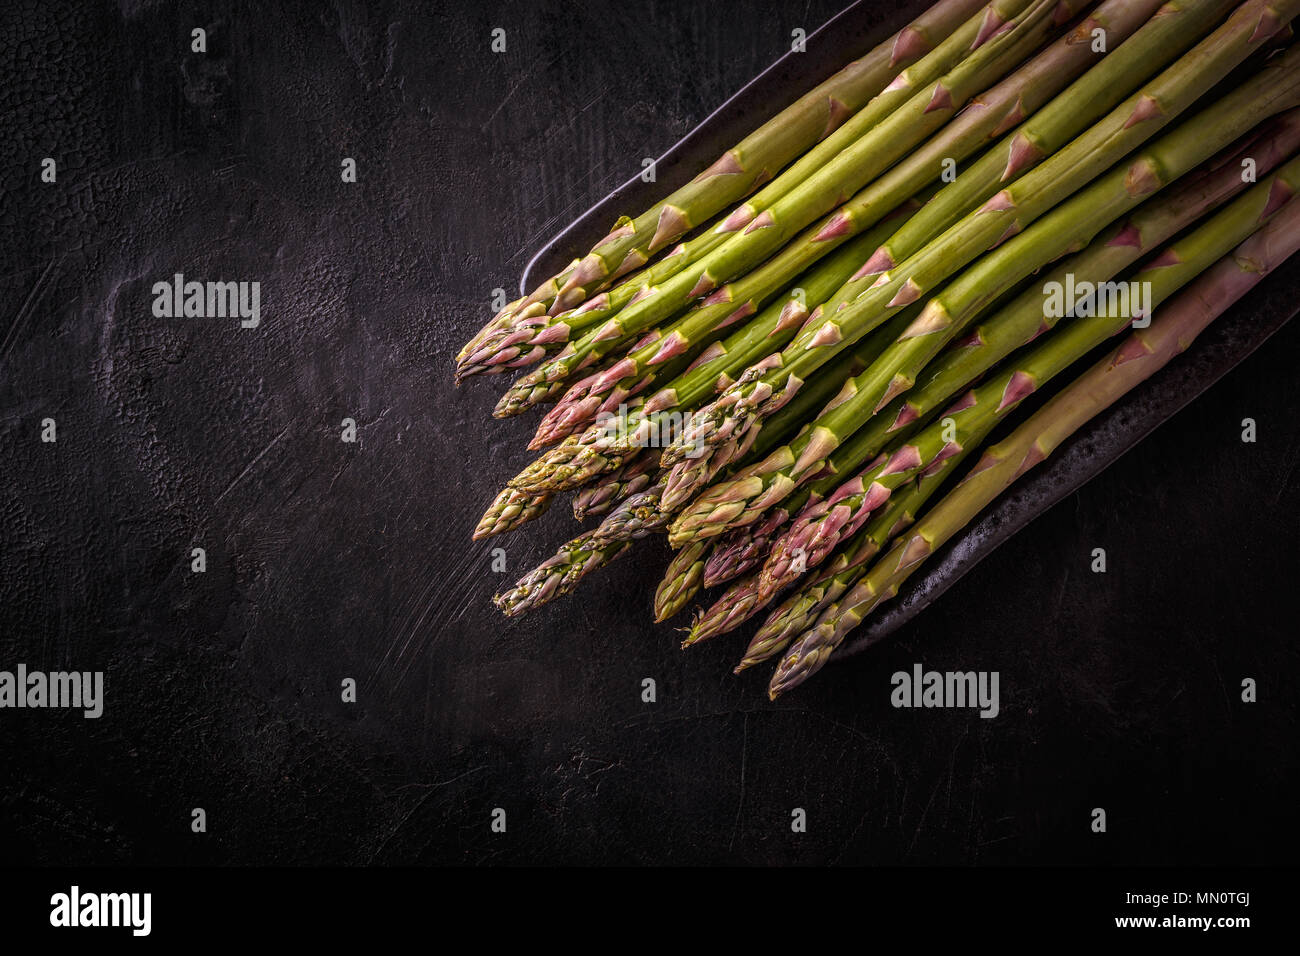 Bunch of green asparagus, top view Stock Photo